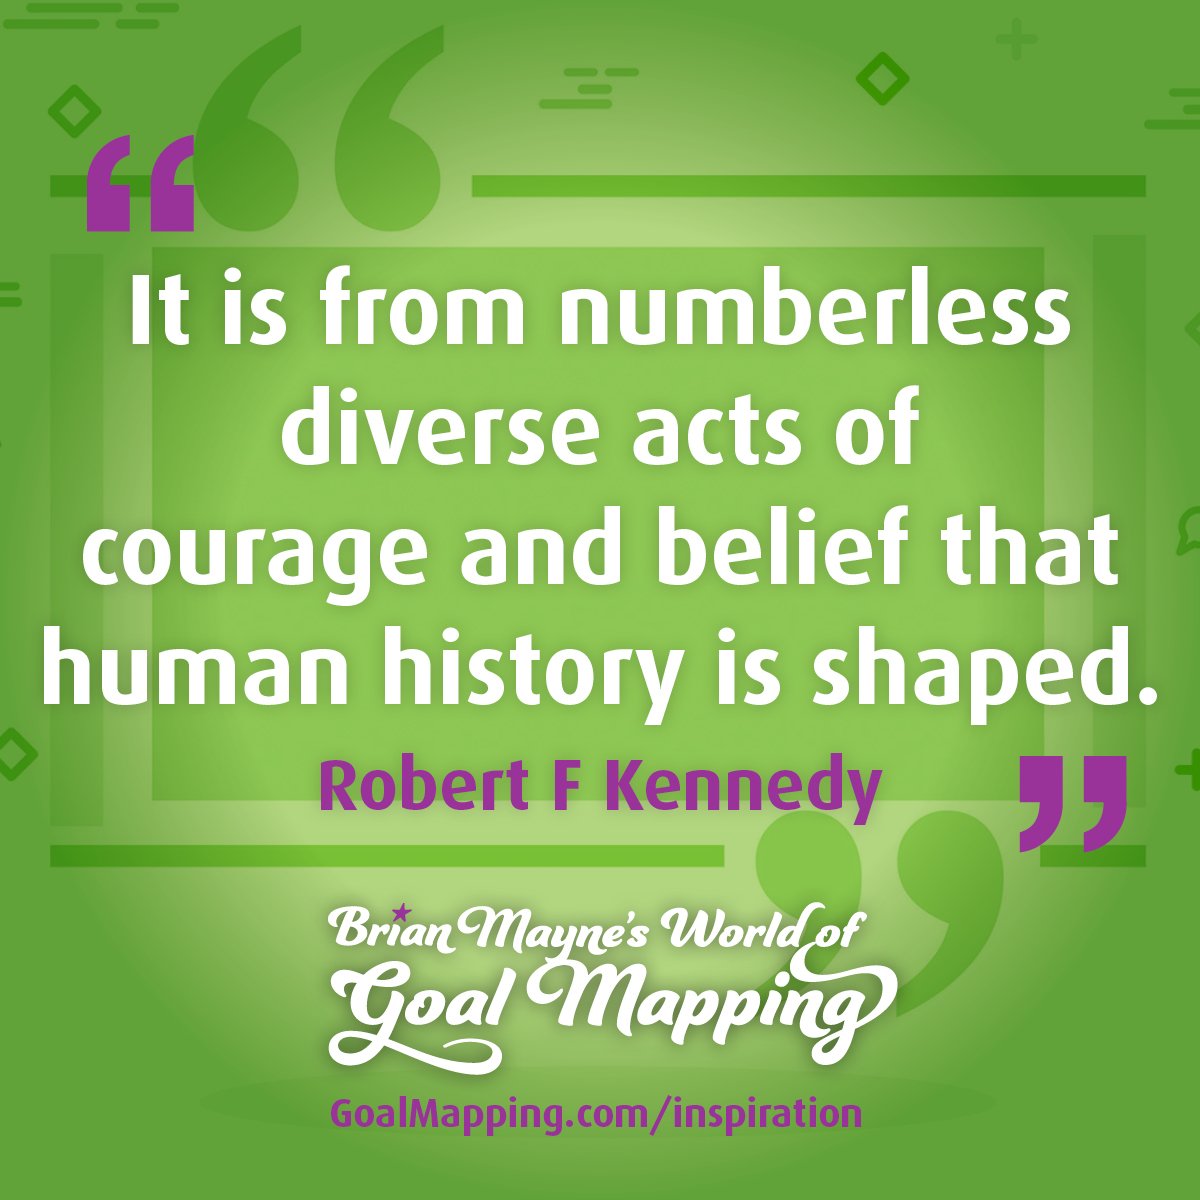 "It is from numberless diverse acts of courage and belief that human history is shaped." Robert F Kennedy